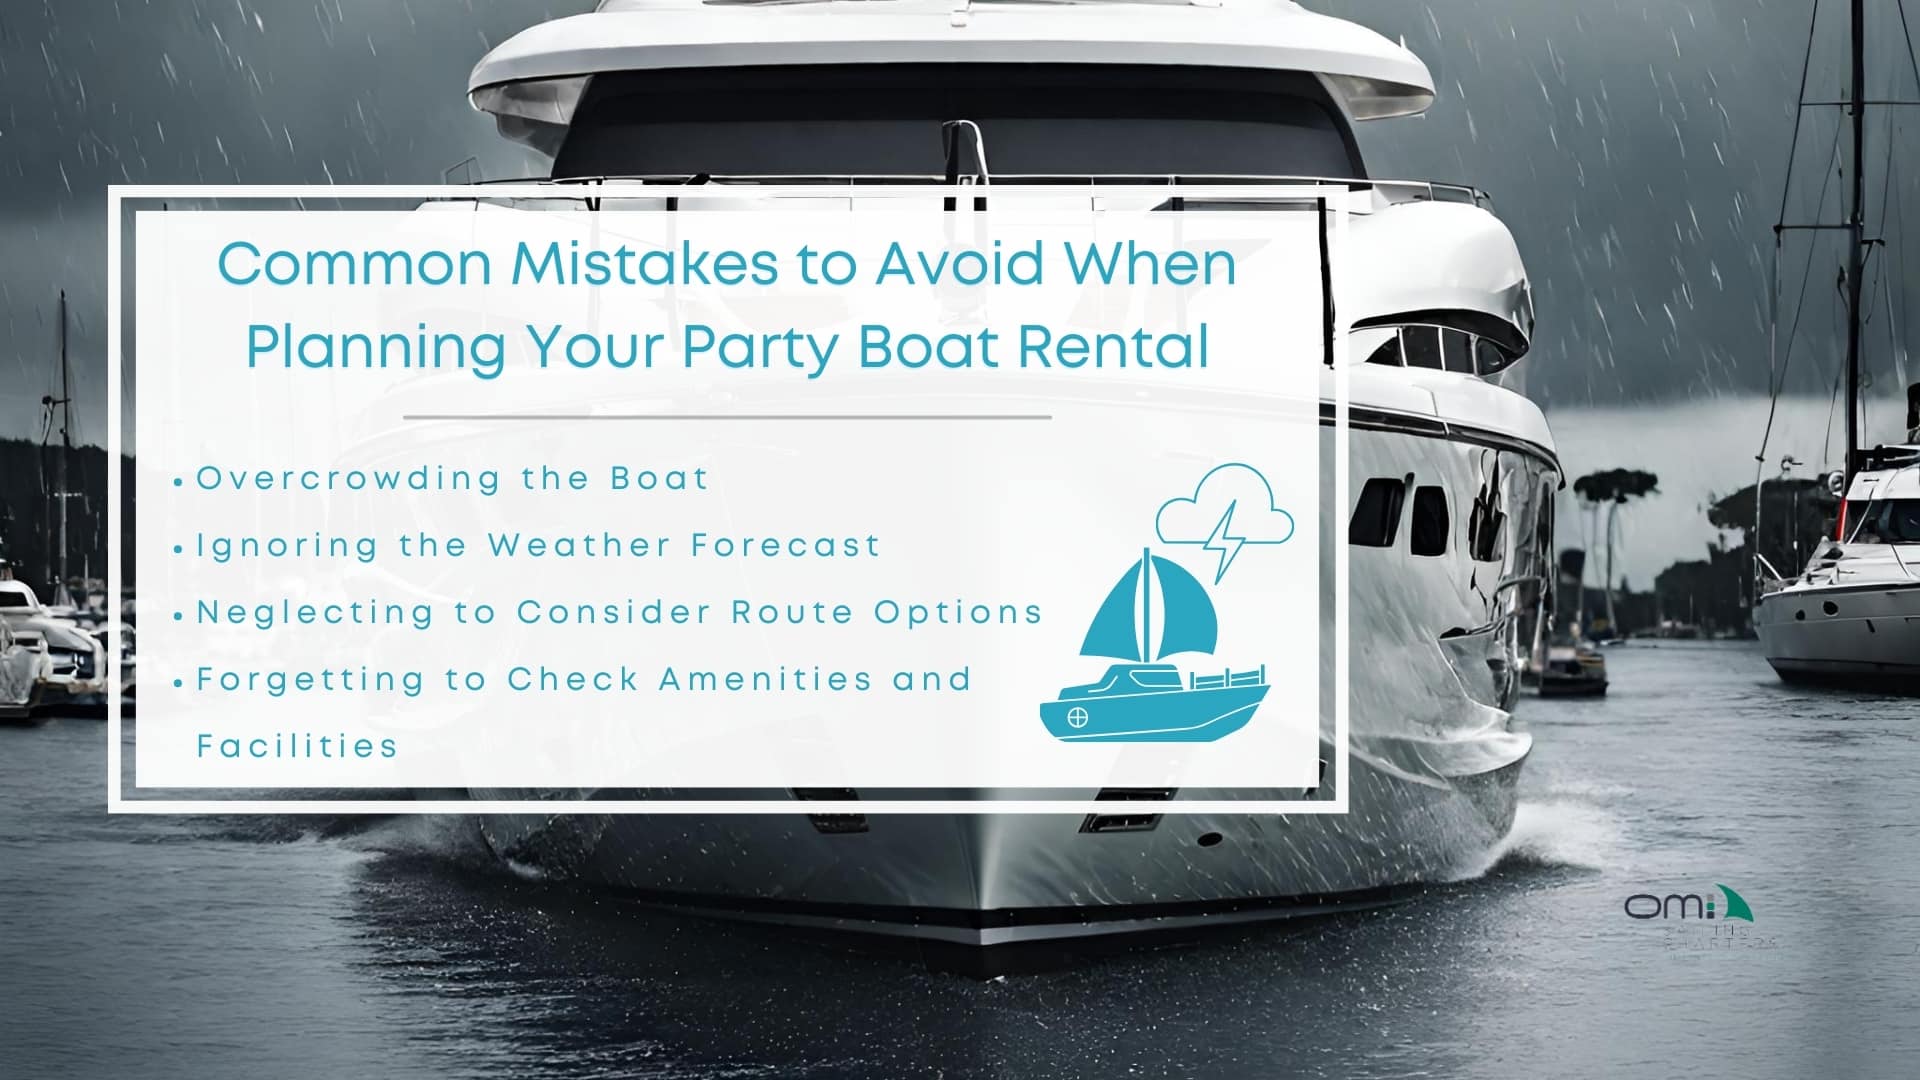 Infographic image of common mistakes to avoid when planning your party boat rental